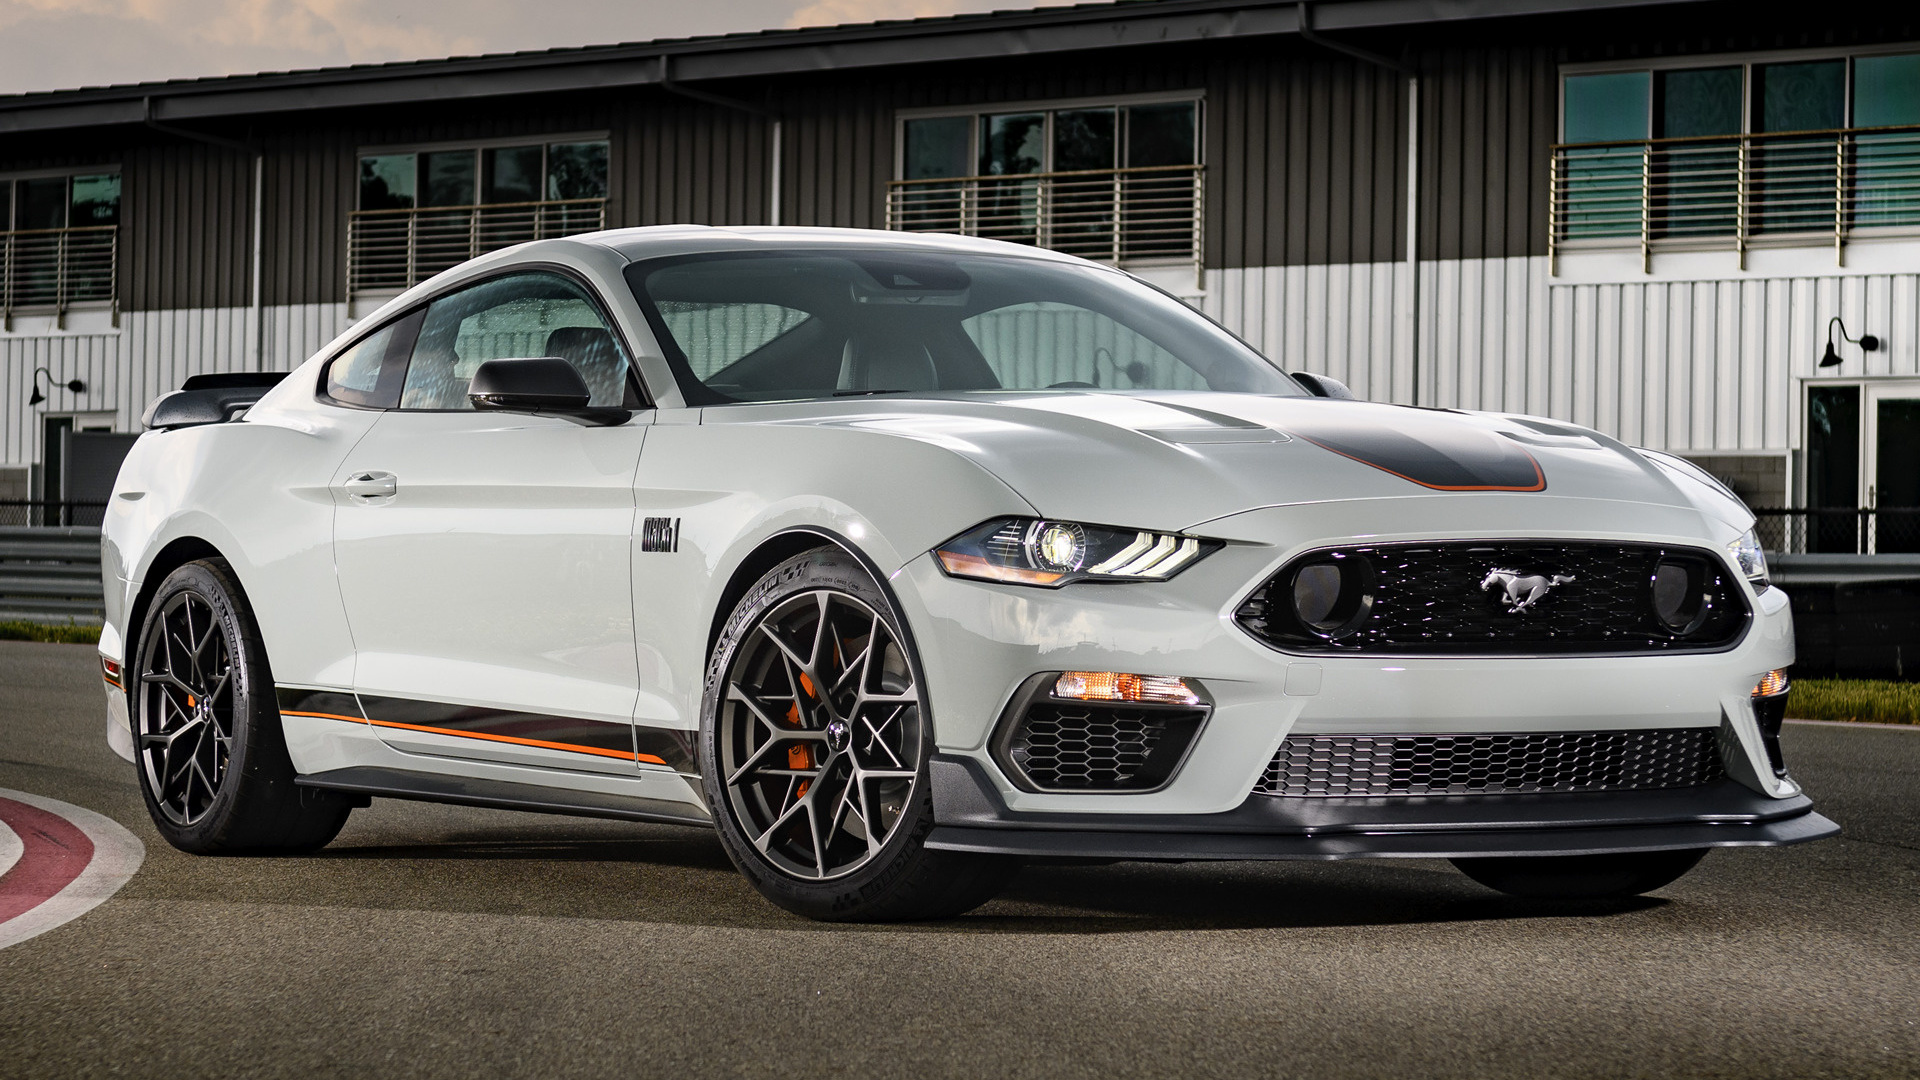 Mustang Of The Day: 2021 Ford Mustang Mach 1 Handling Package